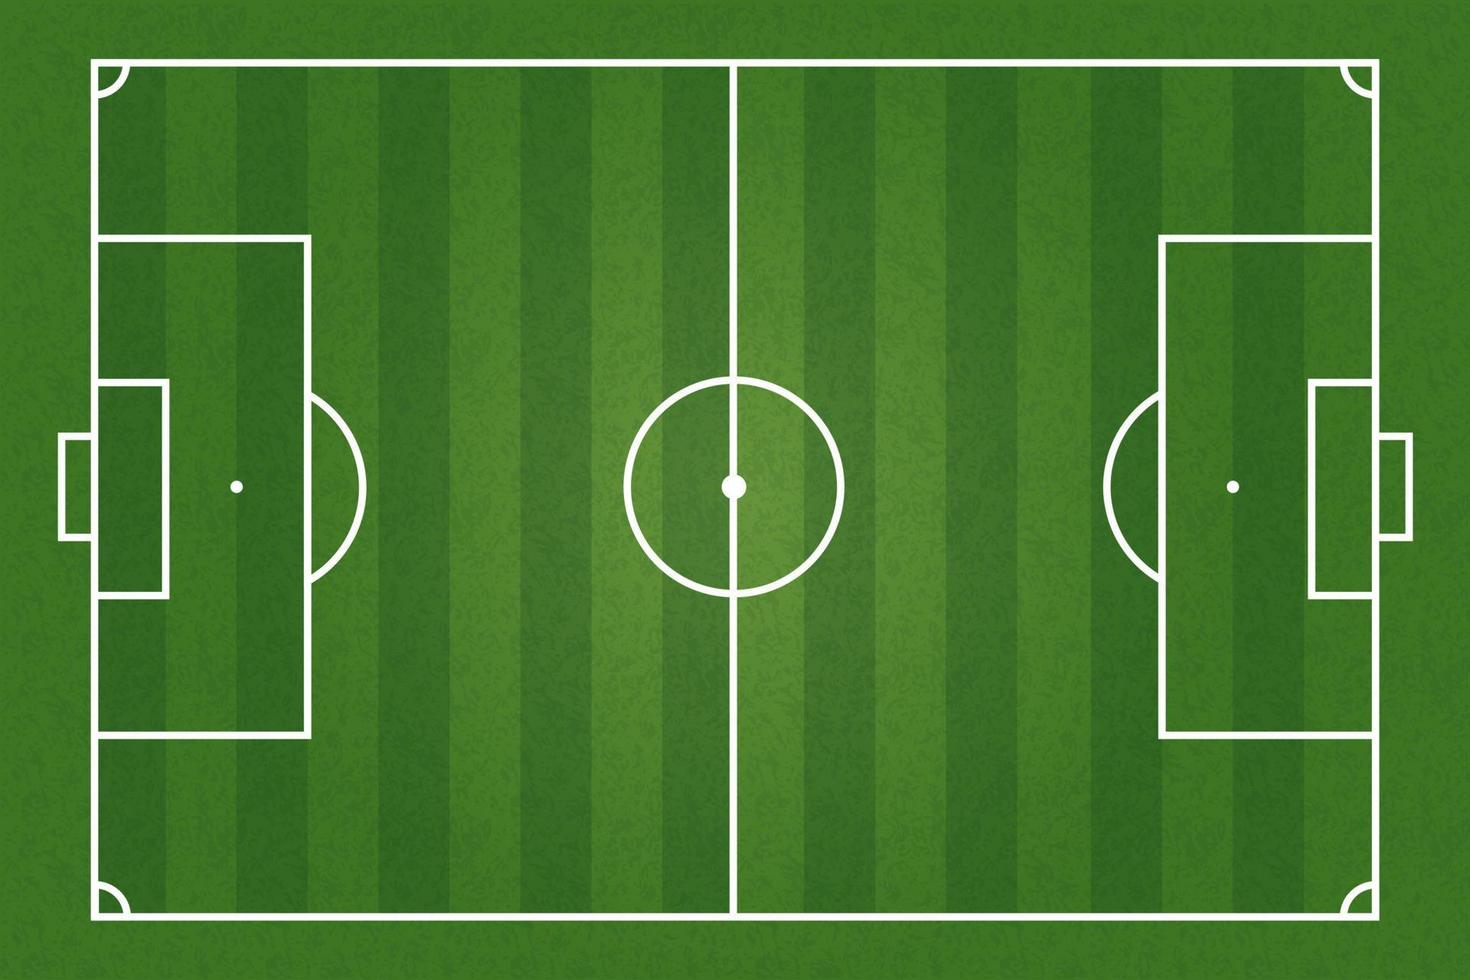 Top view of green football pitch or soccer field vector